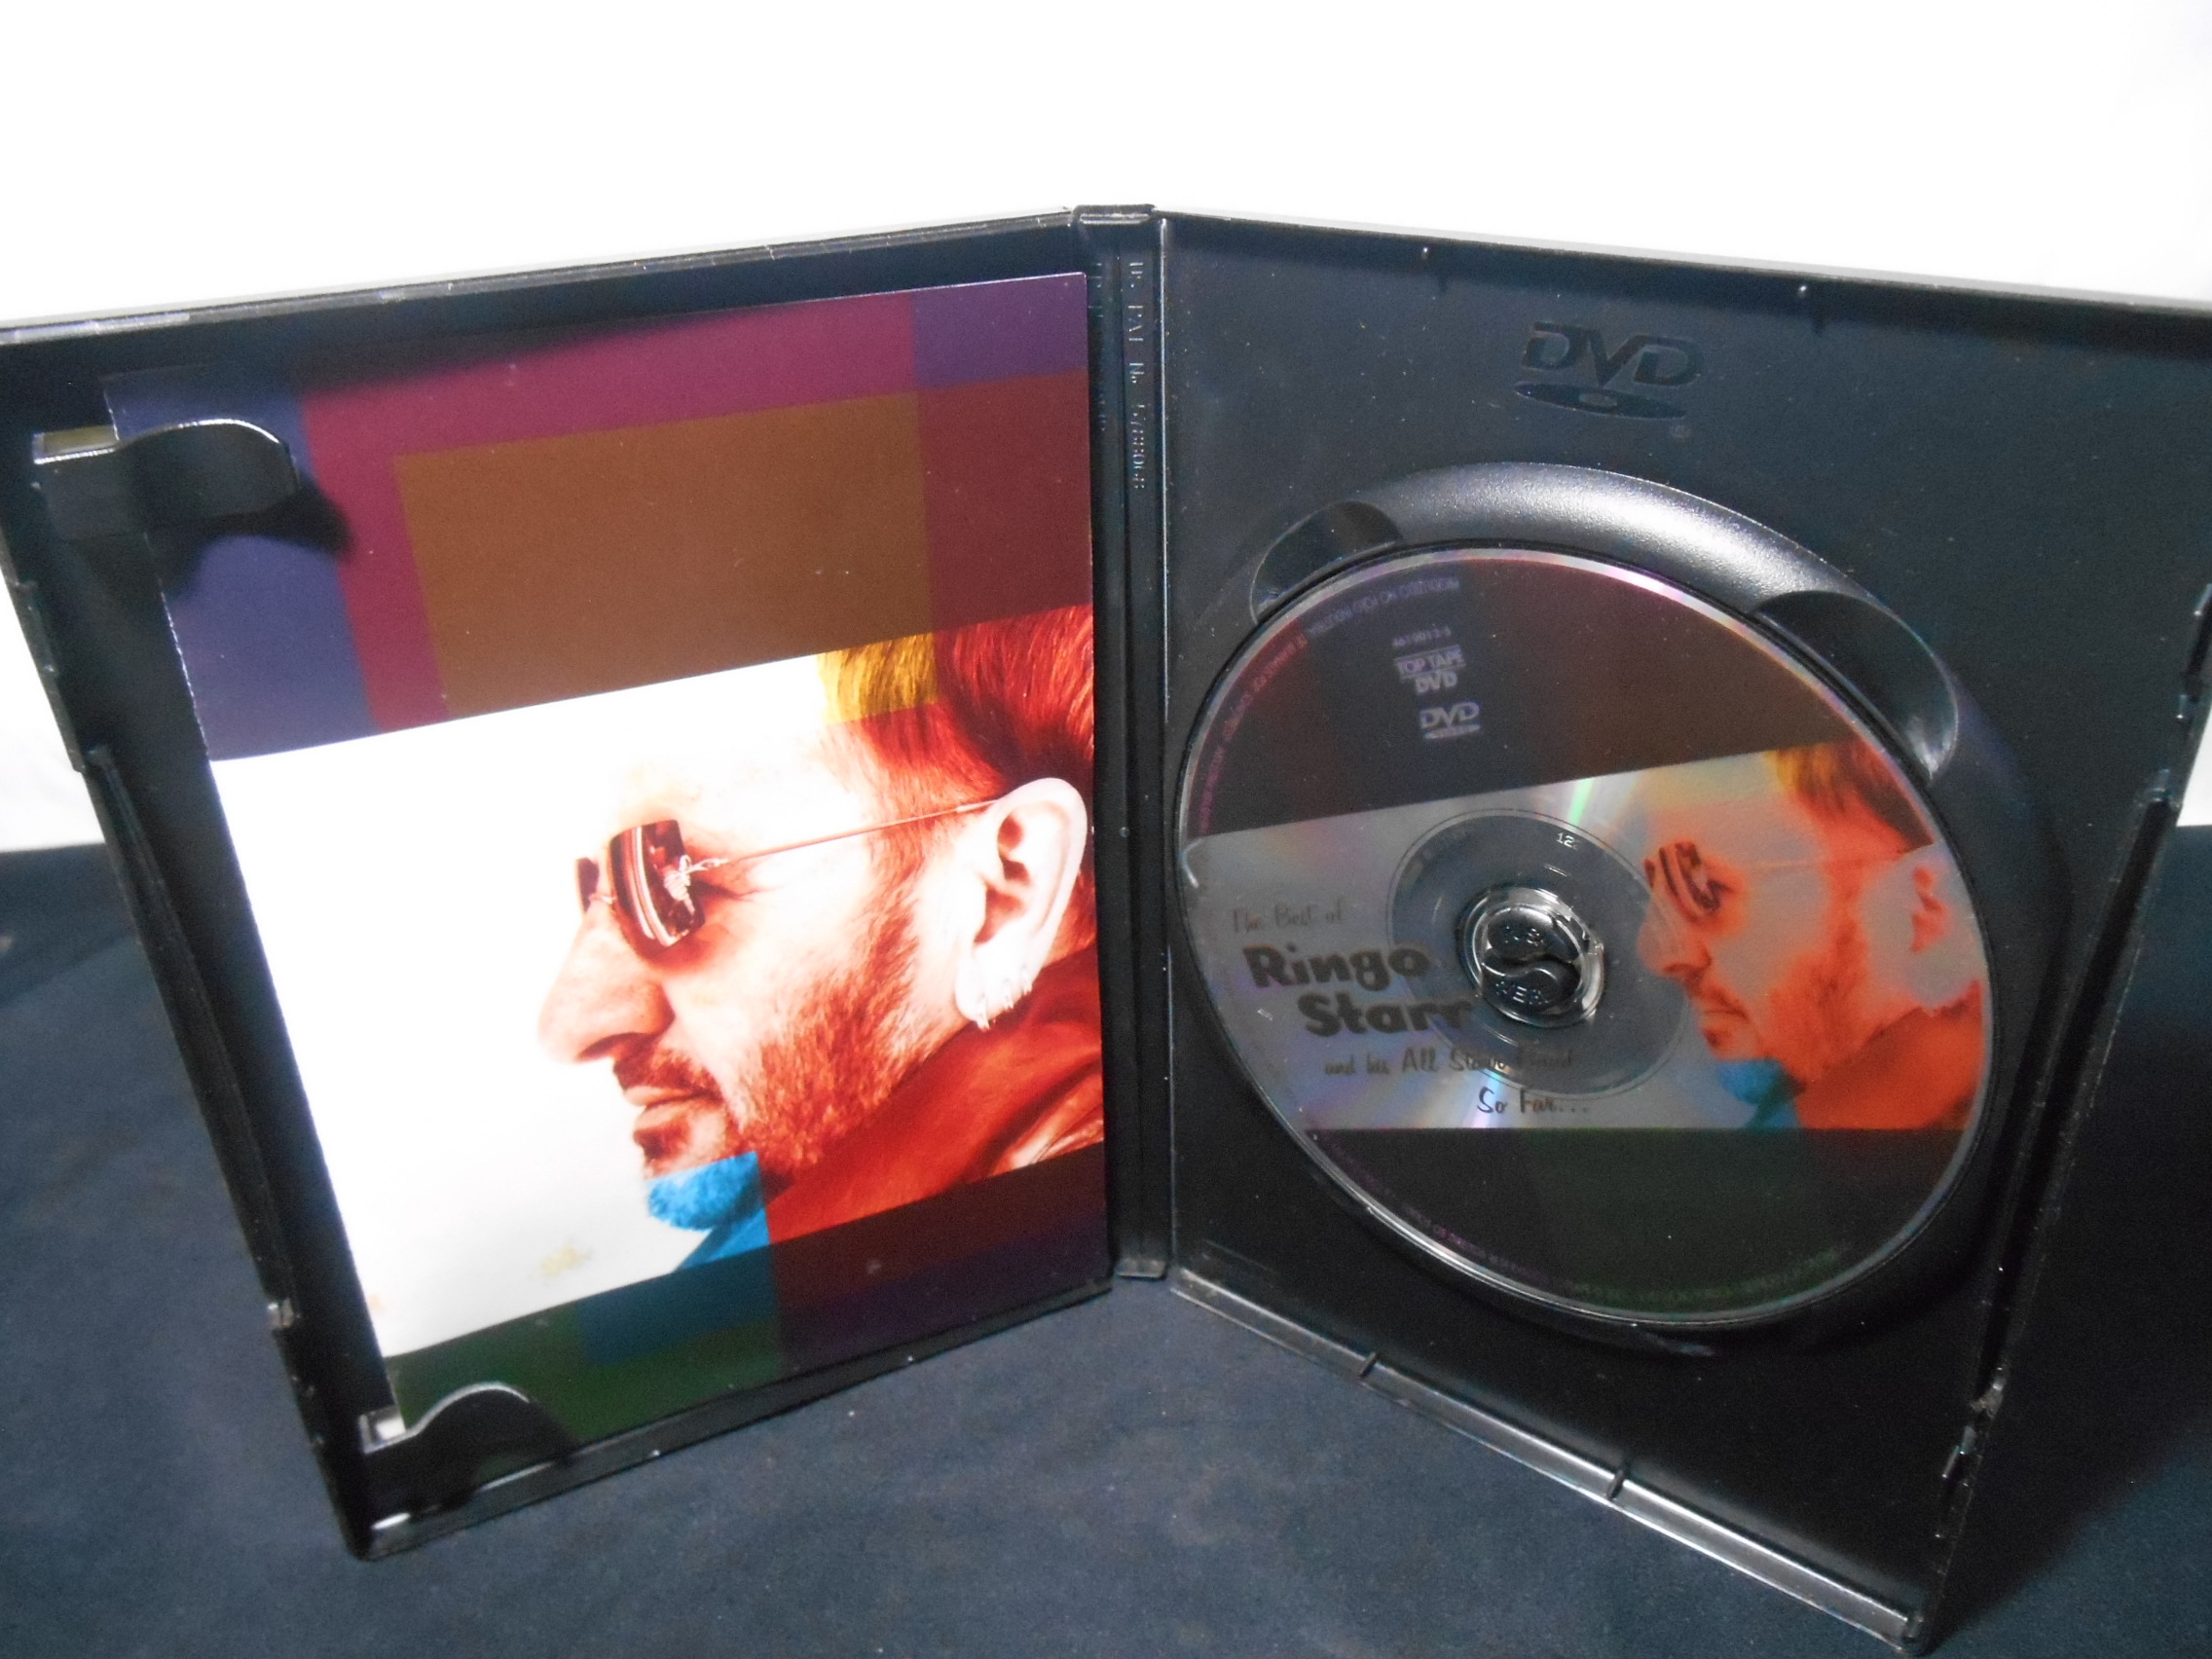 DVD - Ringo Starr And His All-Starr Band - The Best